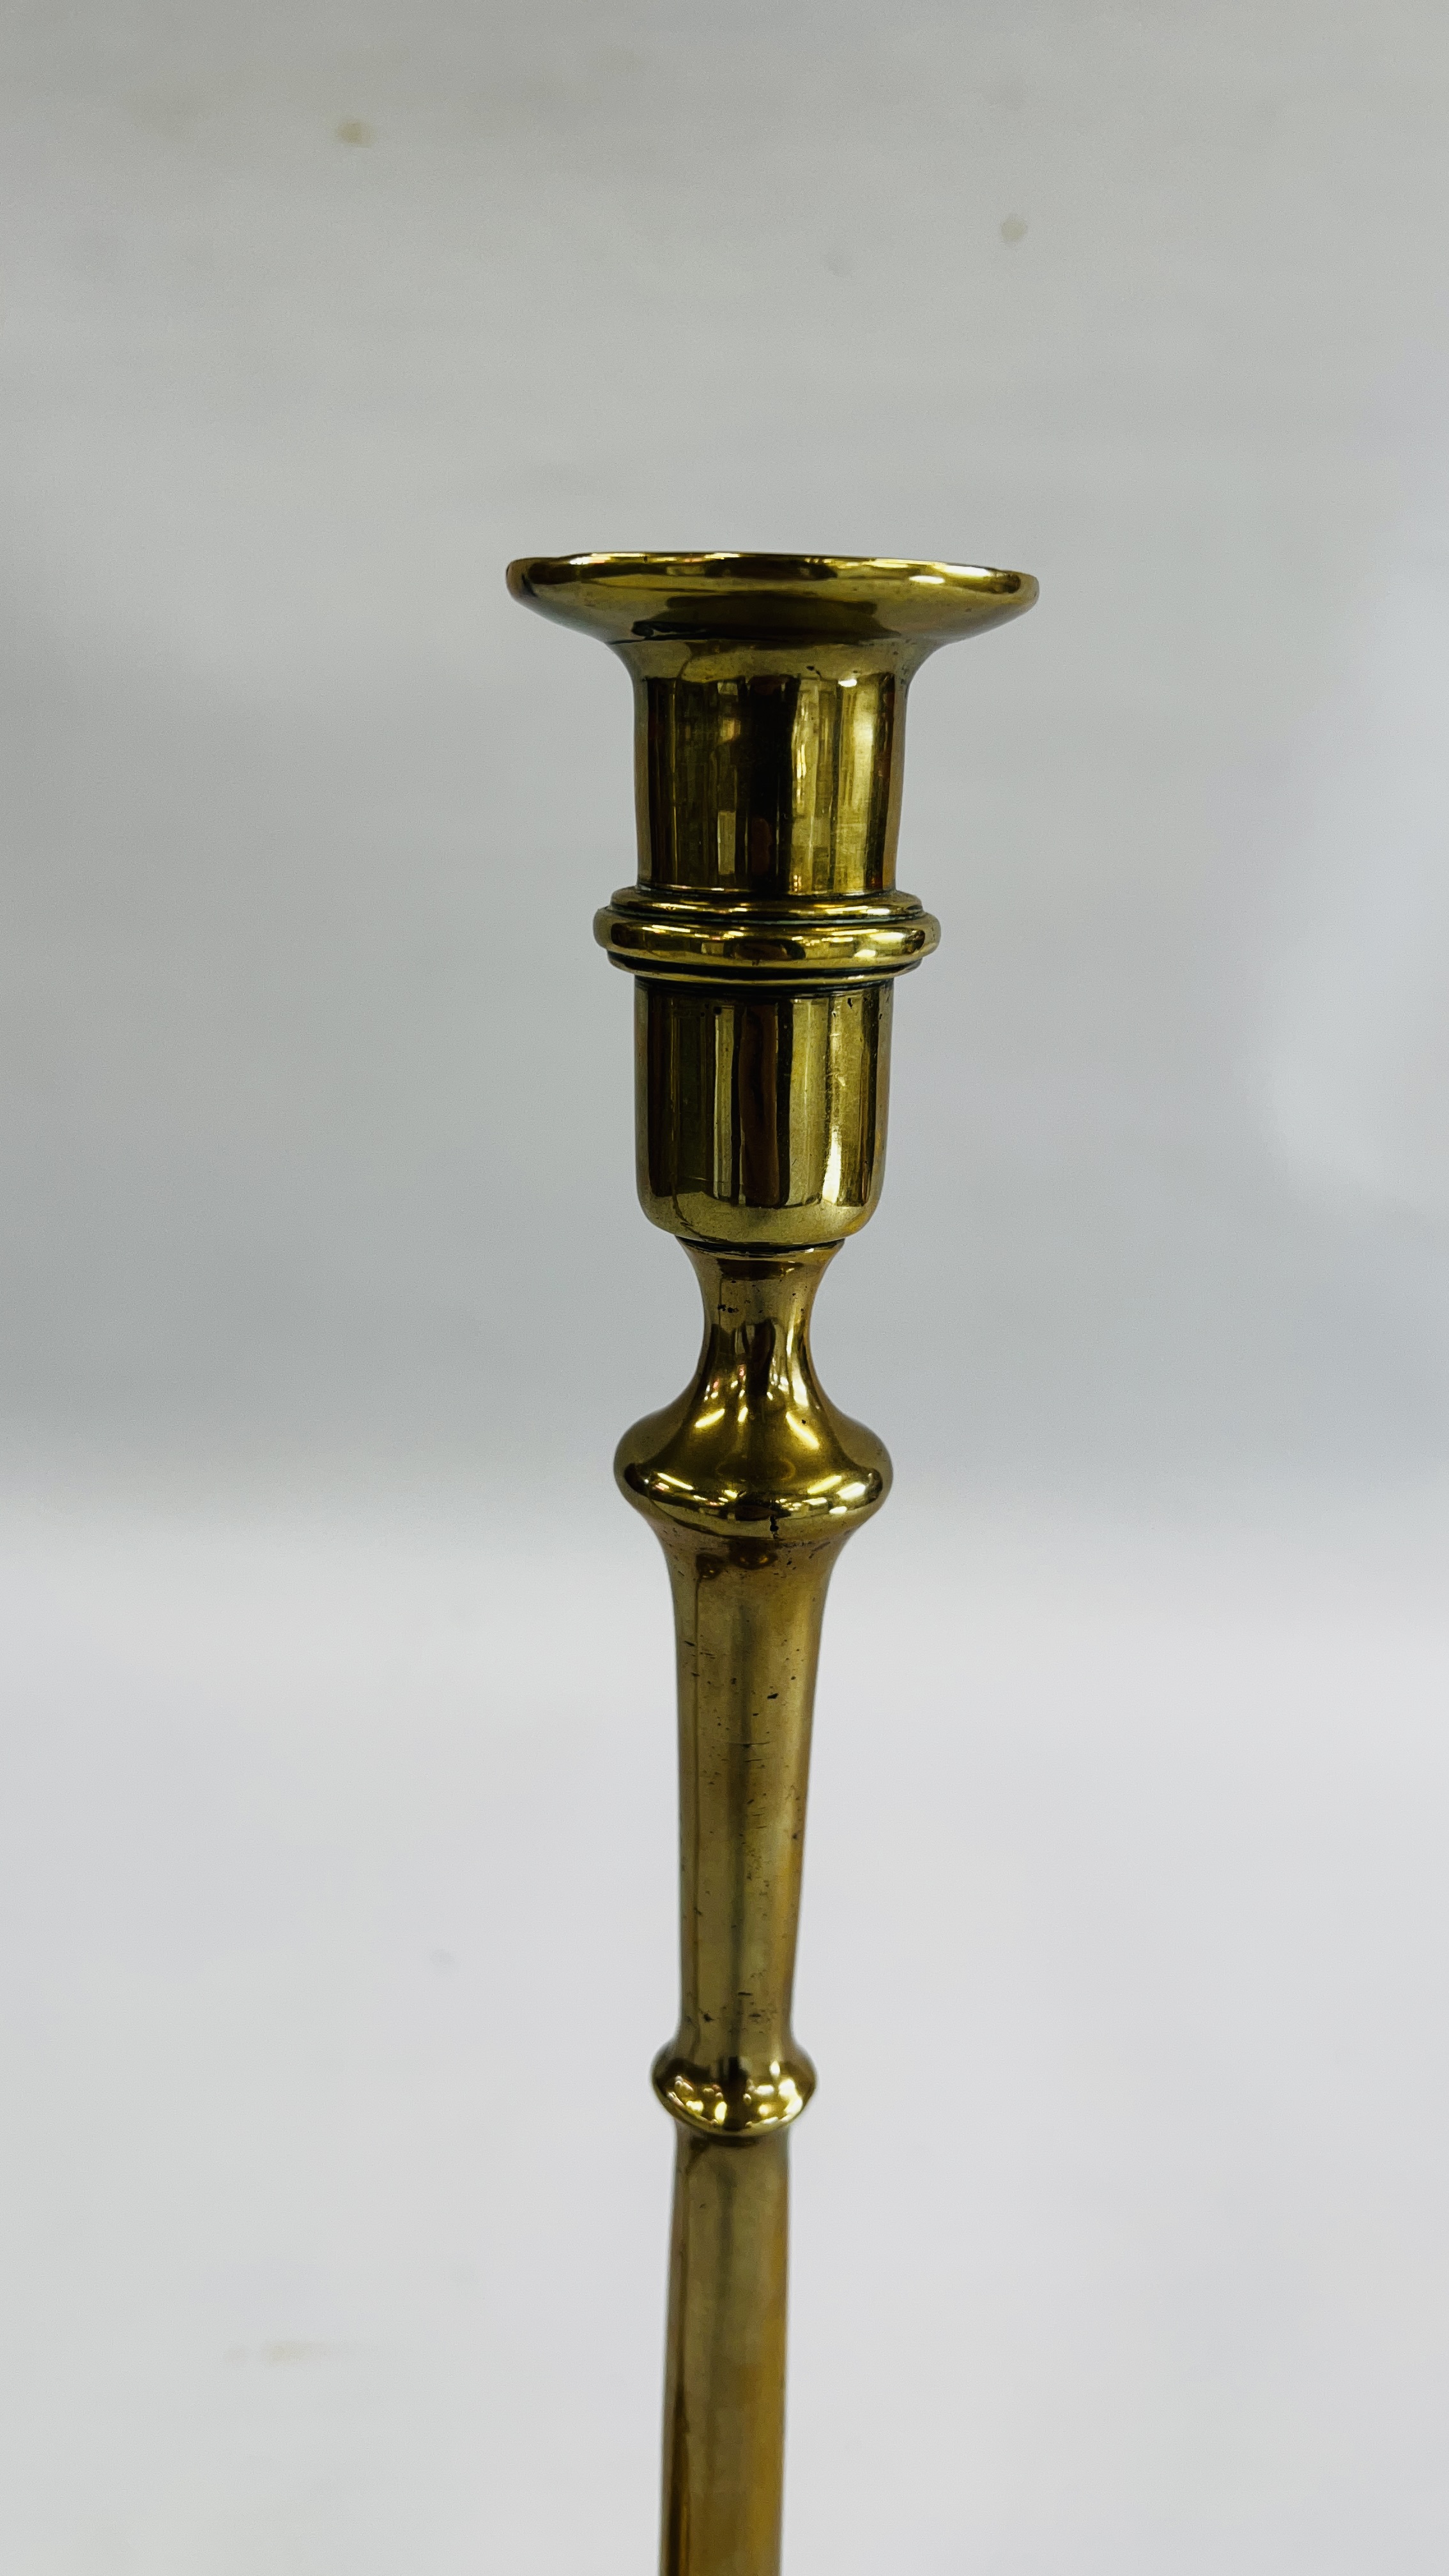 A PAIR OF HEAVY TALL BRASS CANDLESTICKS - HEIGHT 46CM. - Image 4 of 7